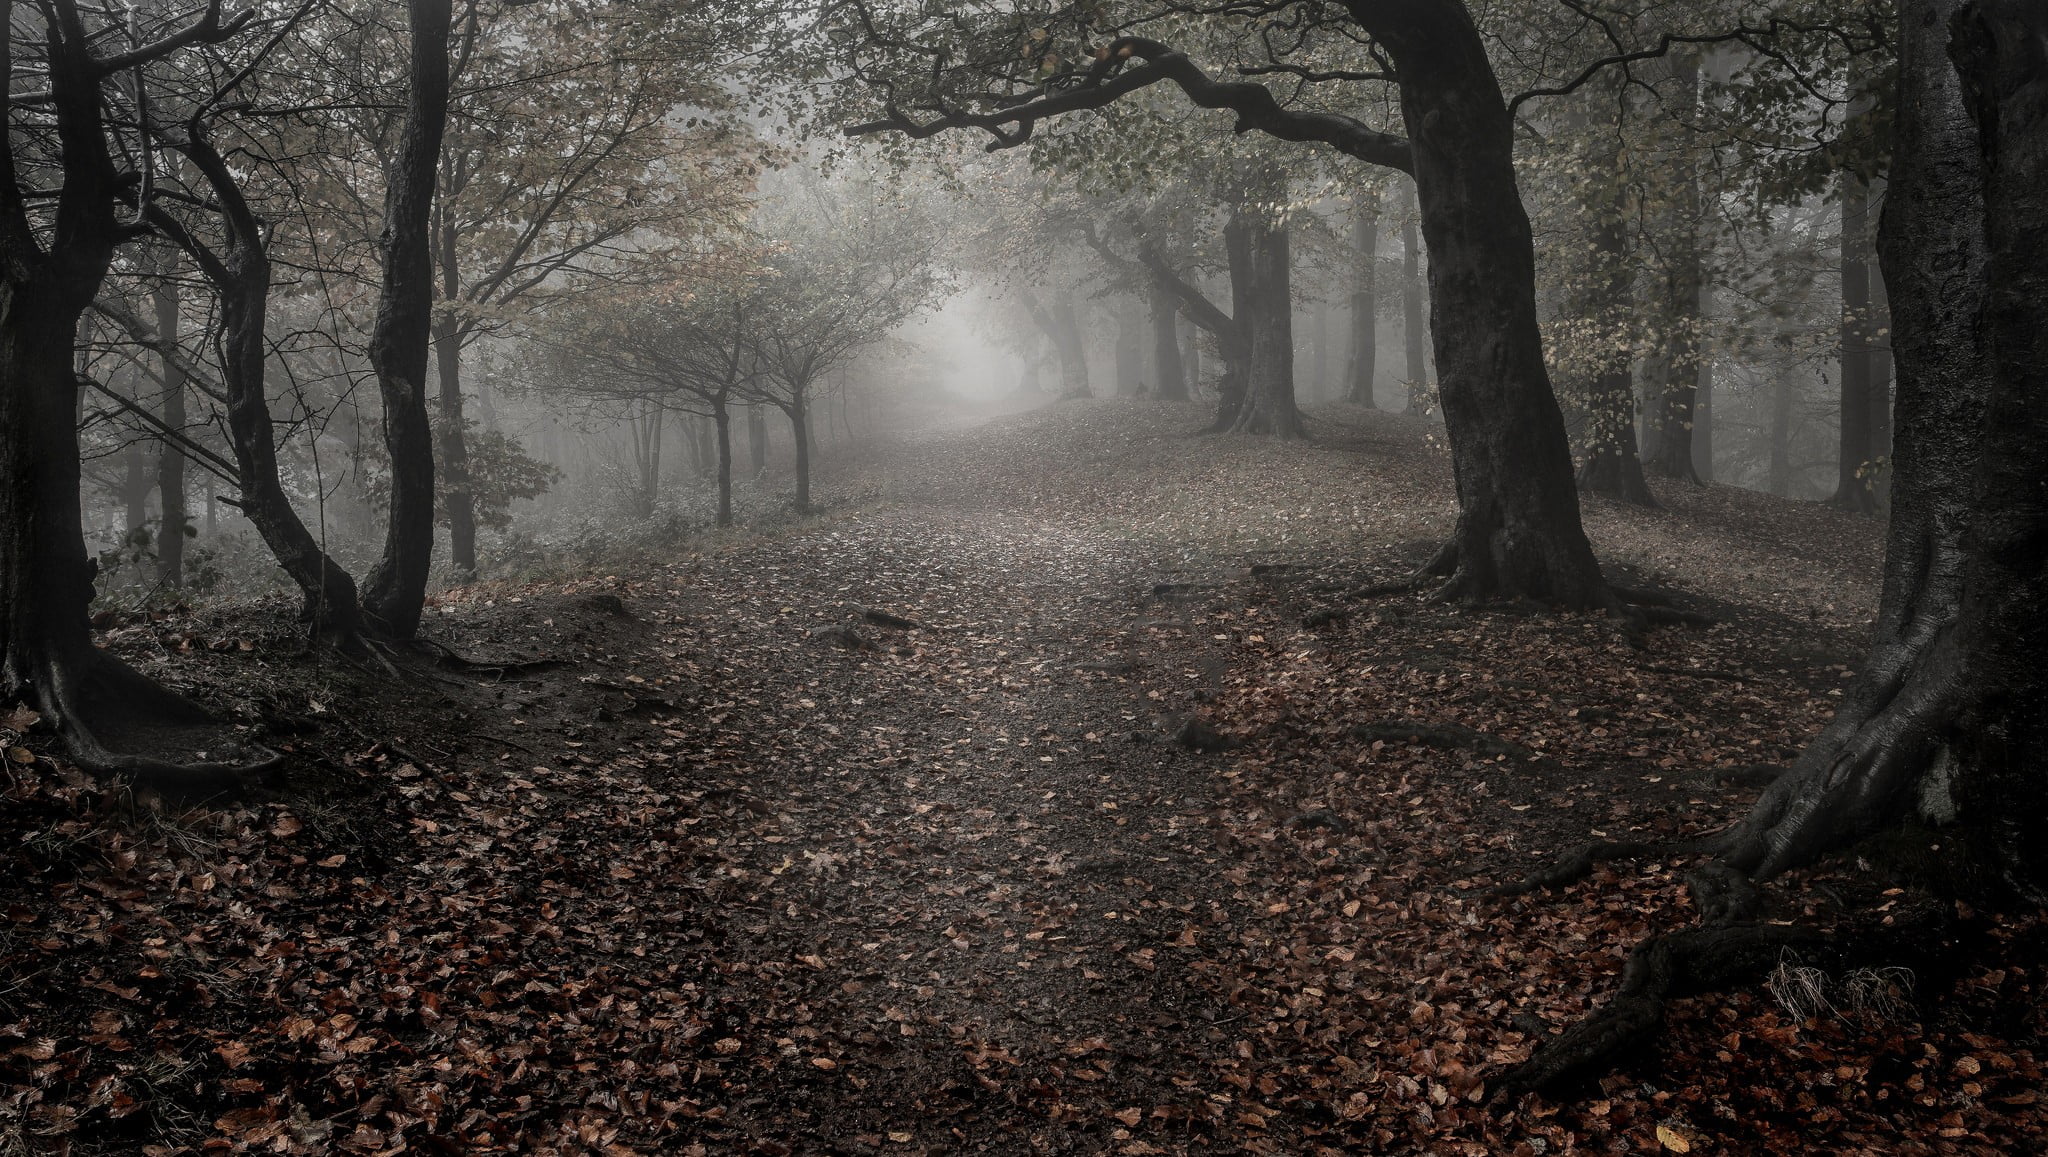 brown trees, forest, nature, landscape, wood, mist, leaves, fall